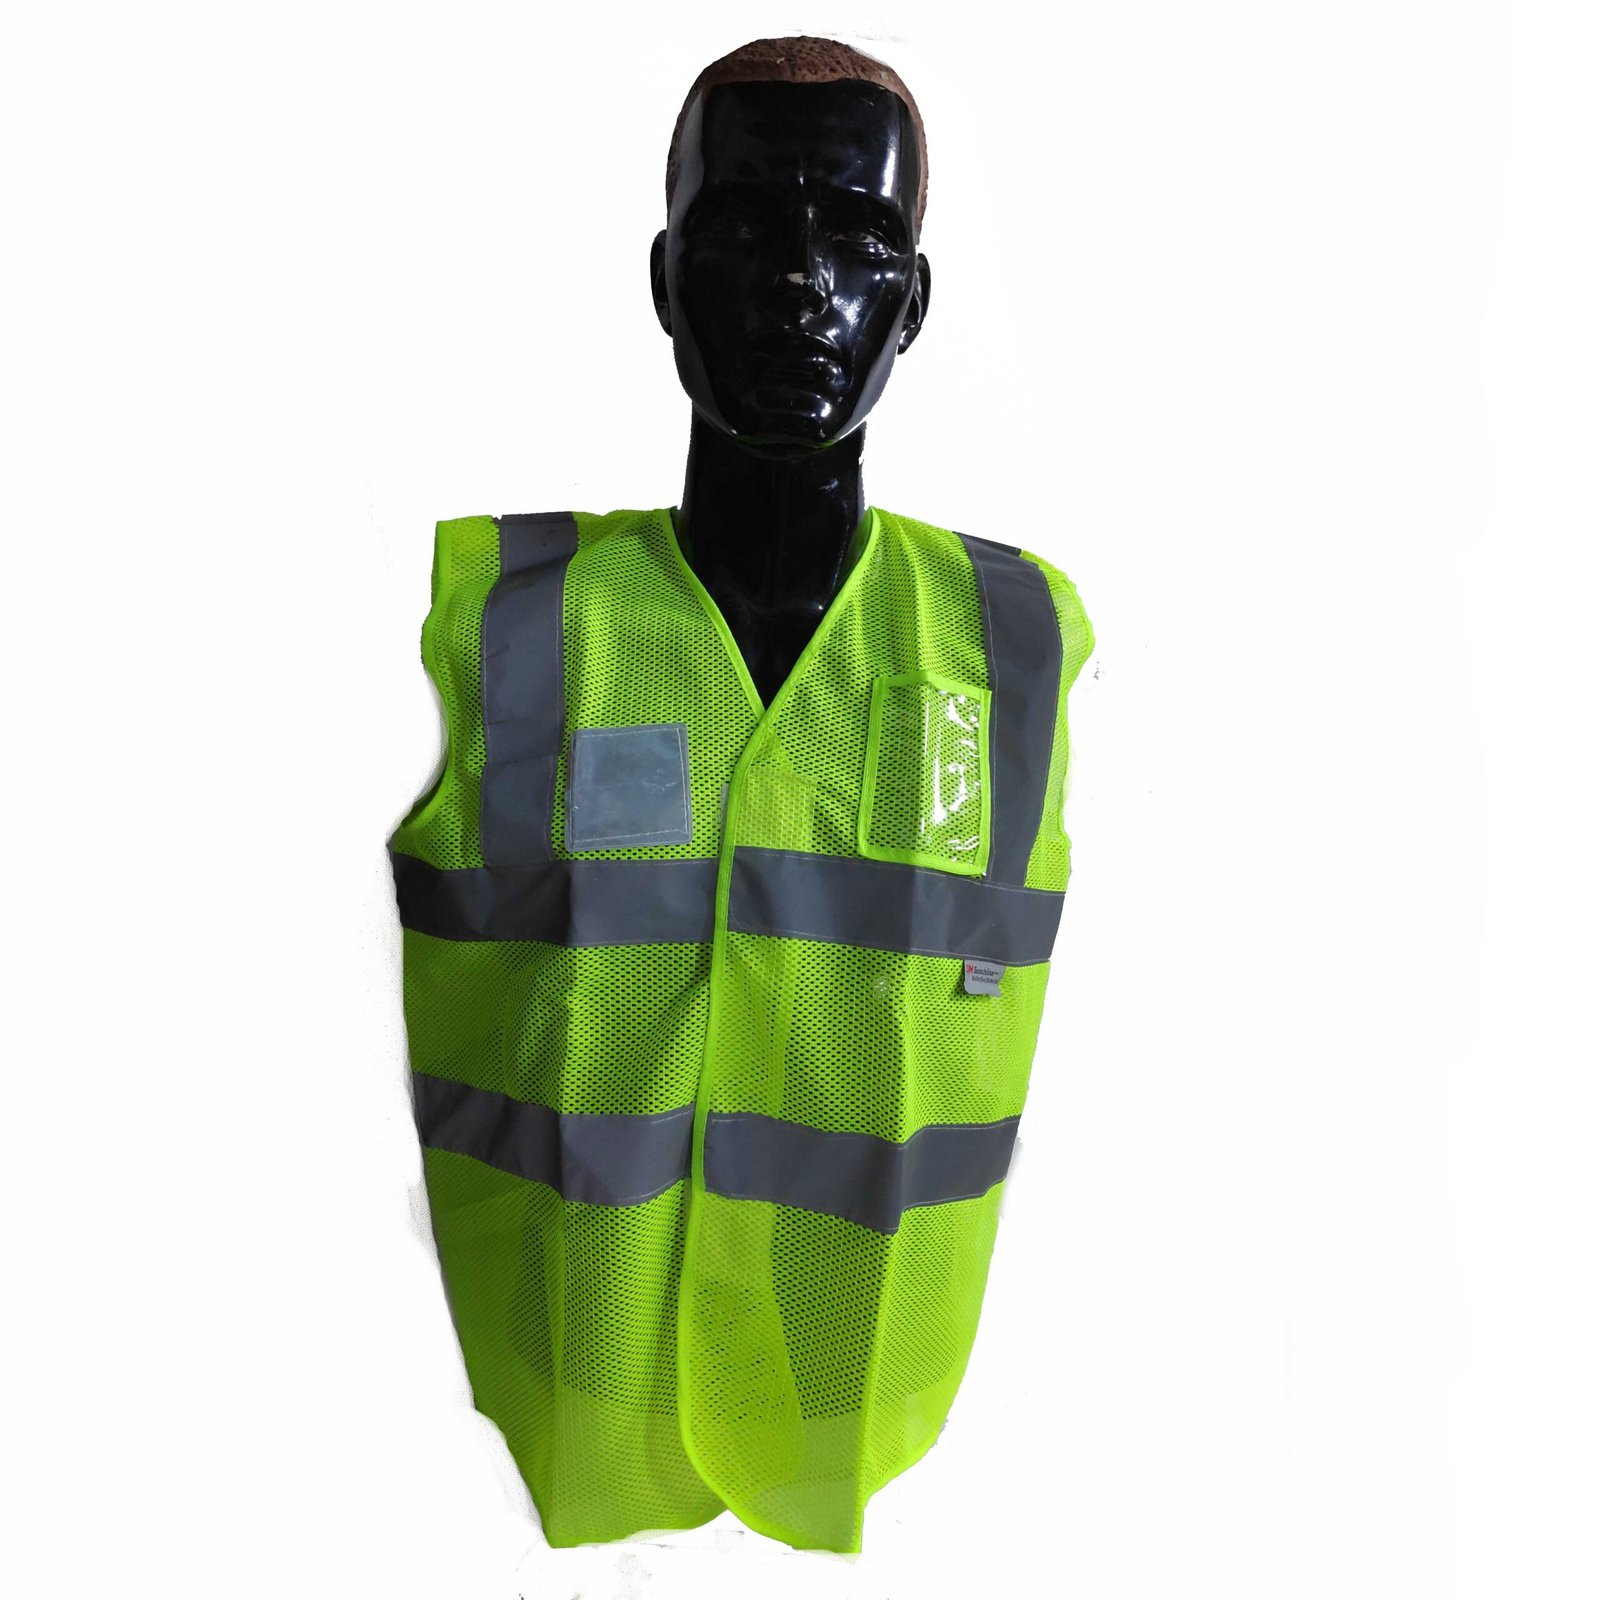 3M Engineer Safety Jacket with 3 Pockets: Buy Online at Best Price in Egypt  - Souq is now Amazon.eg